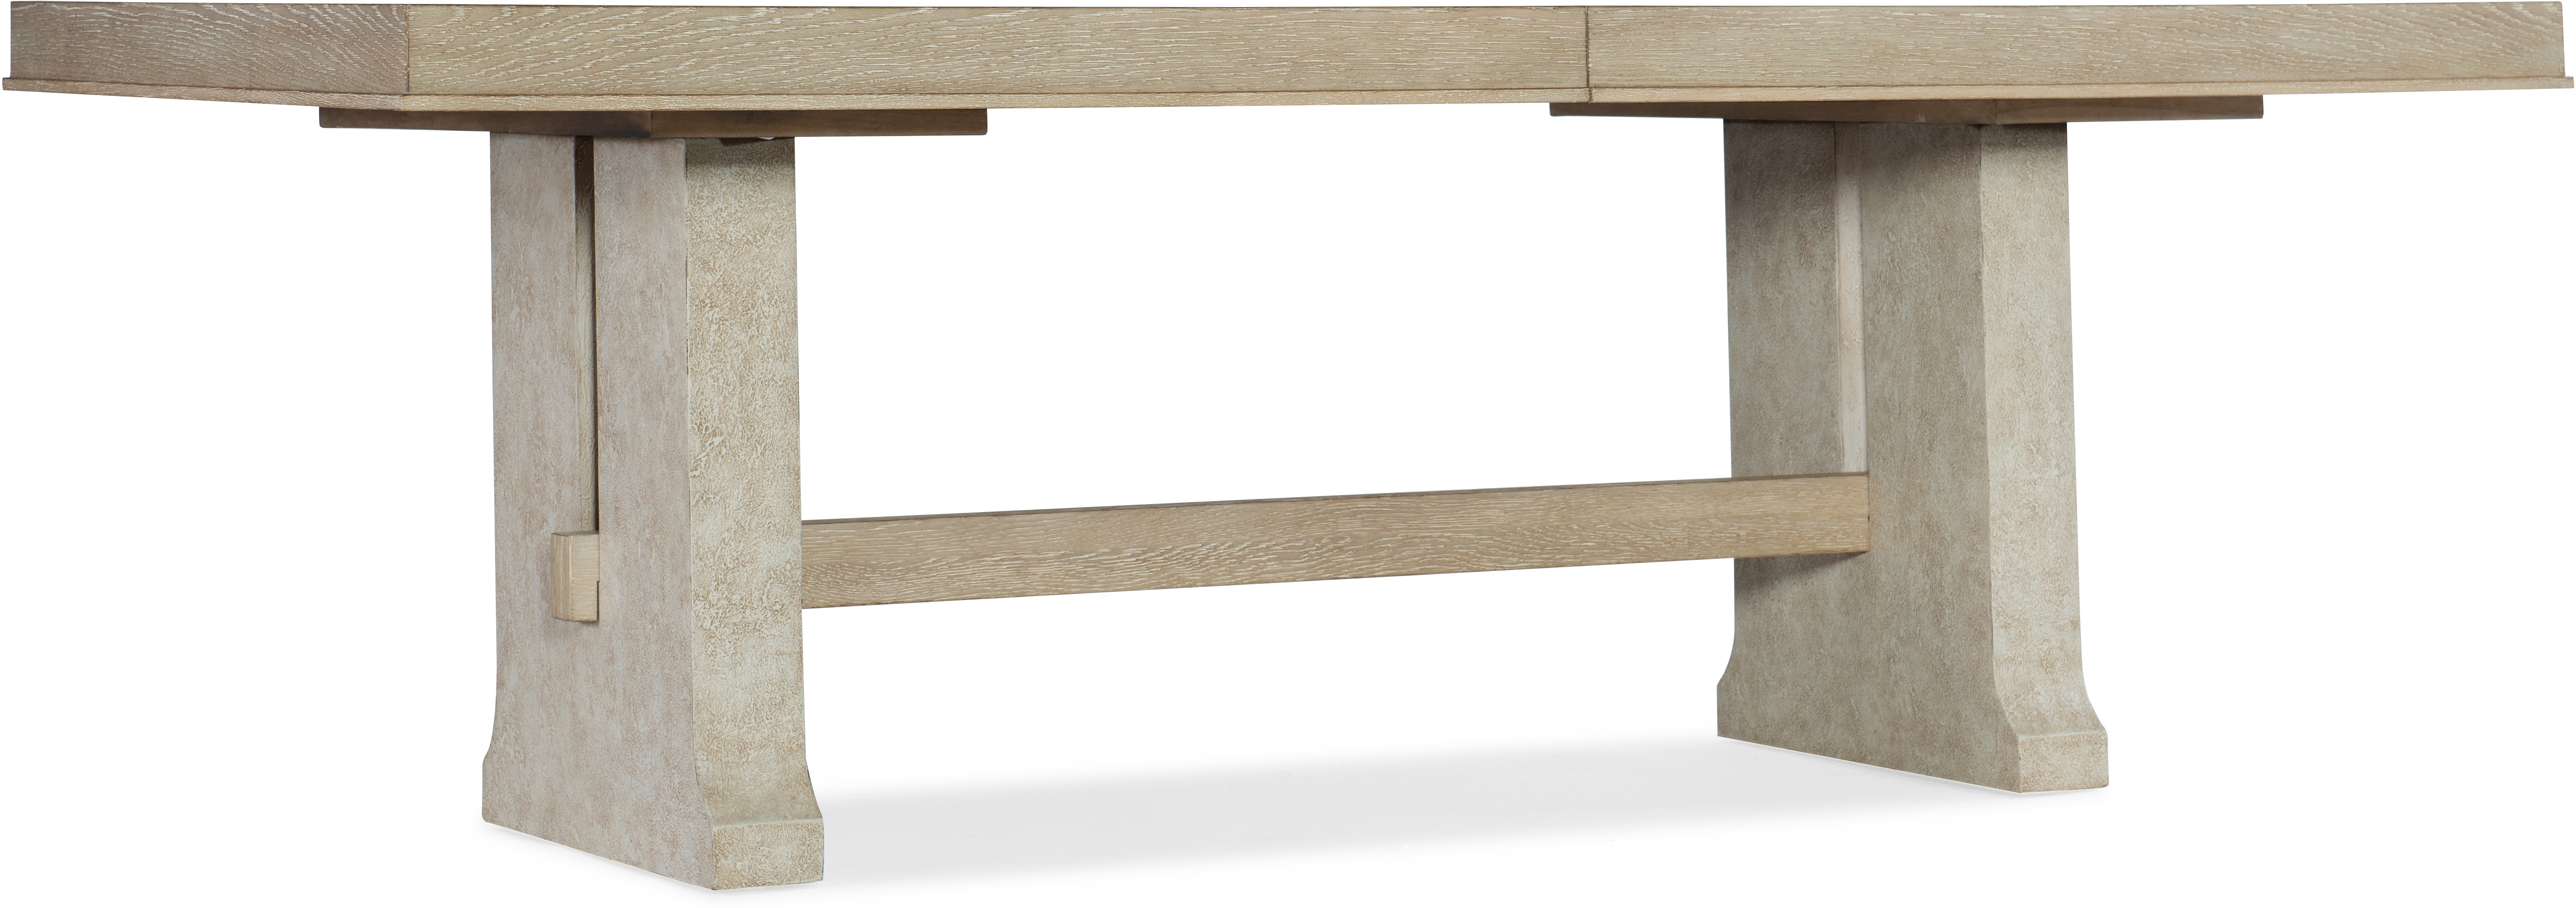 Hooker Furniture Cascade Dining Table